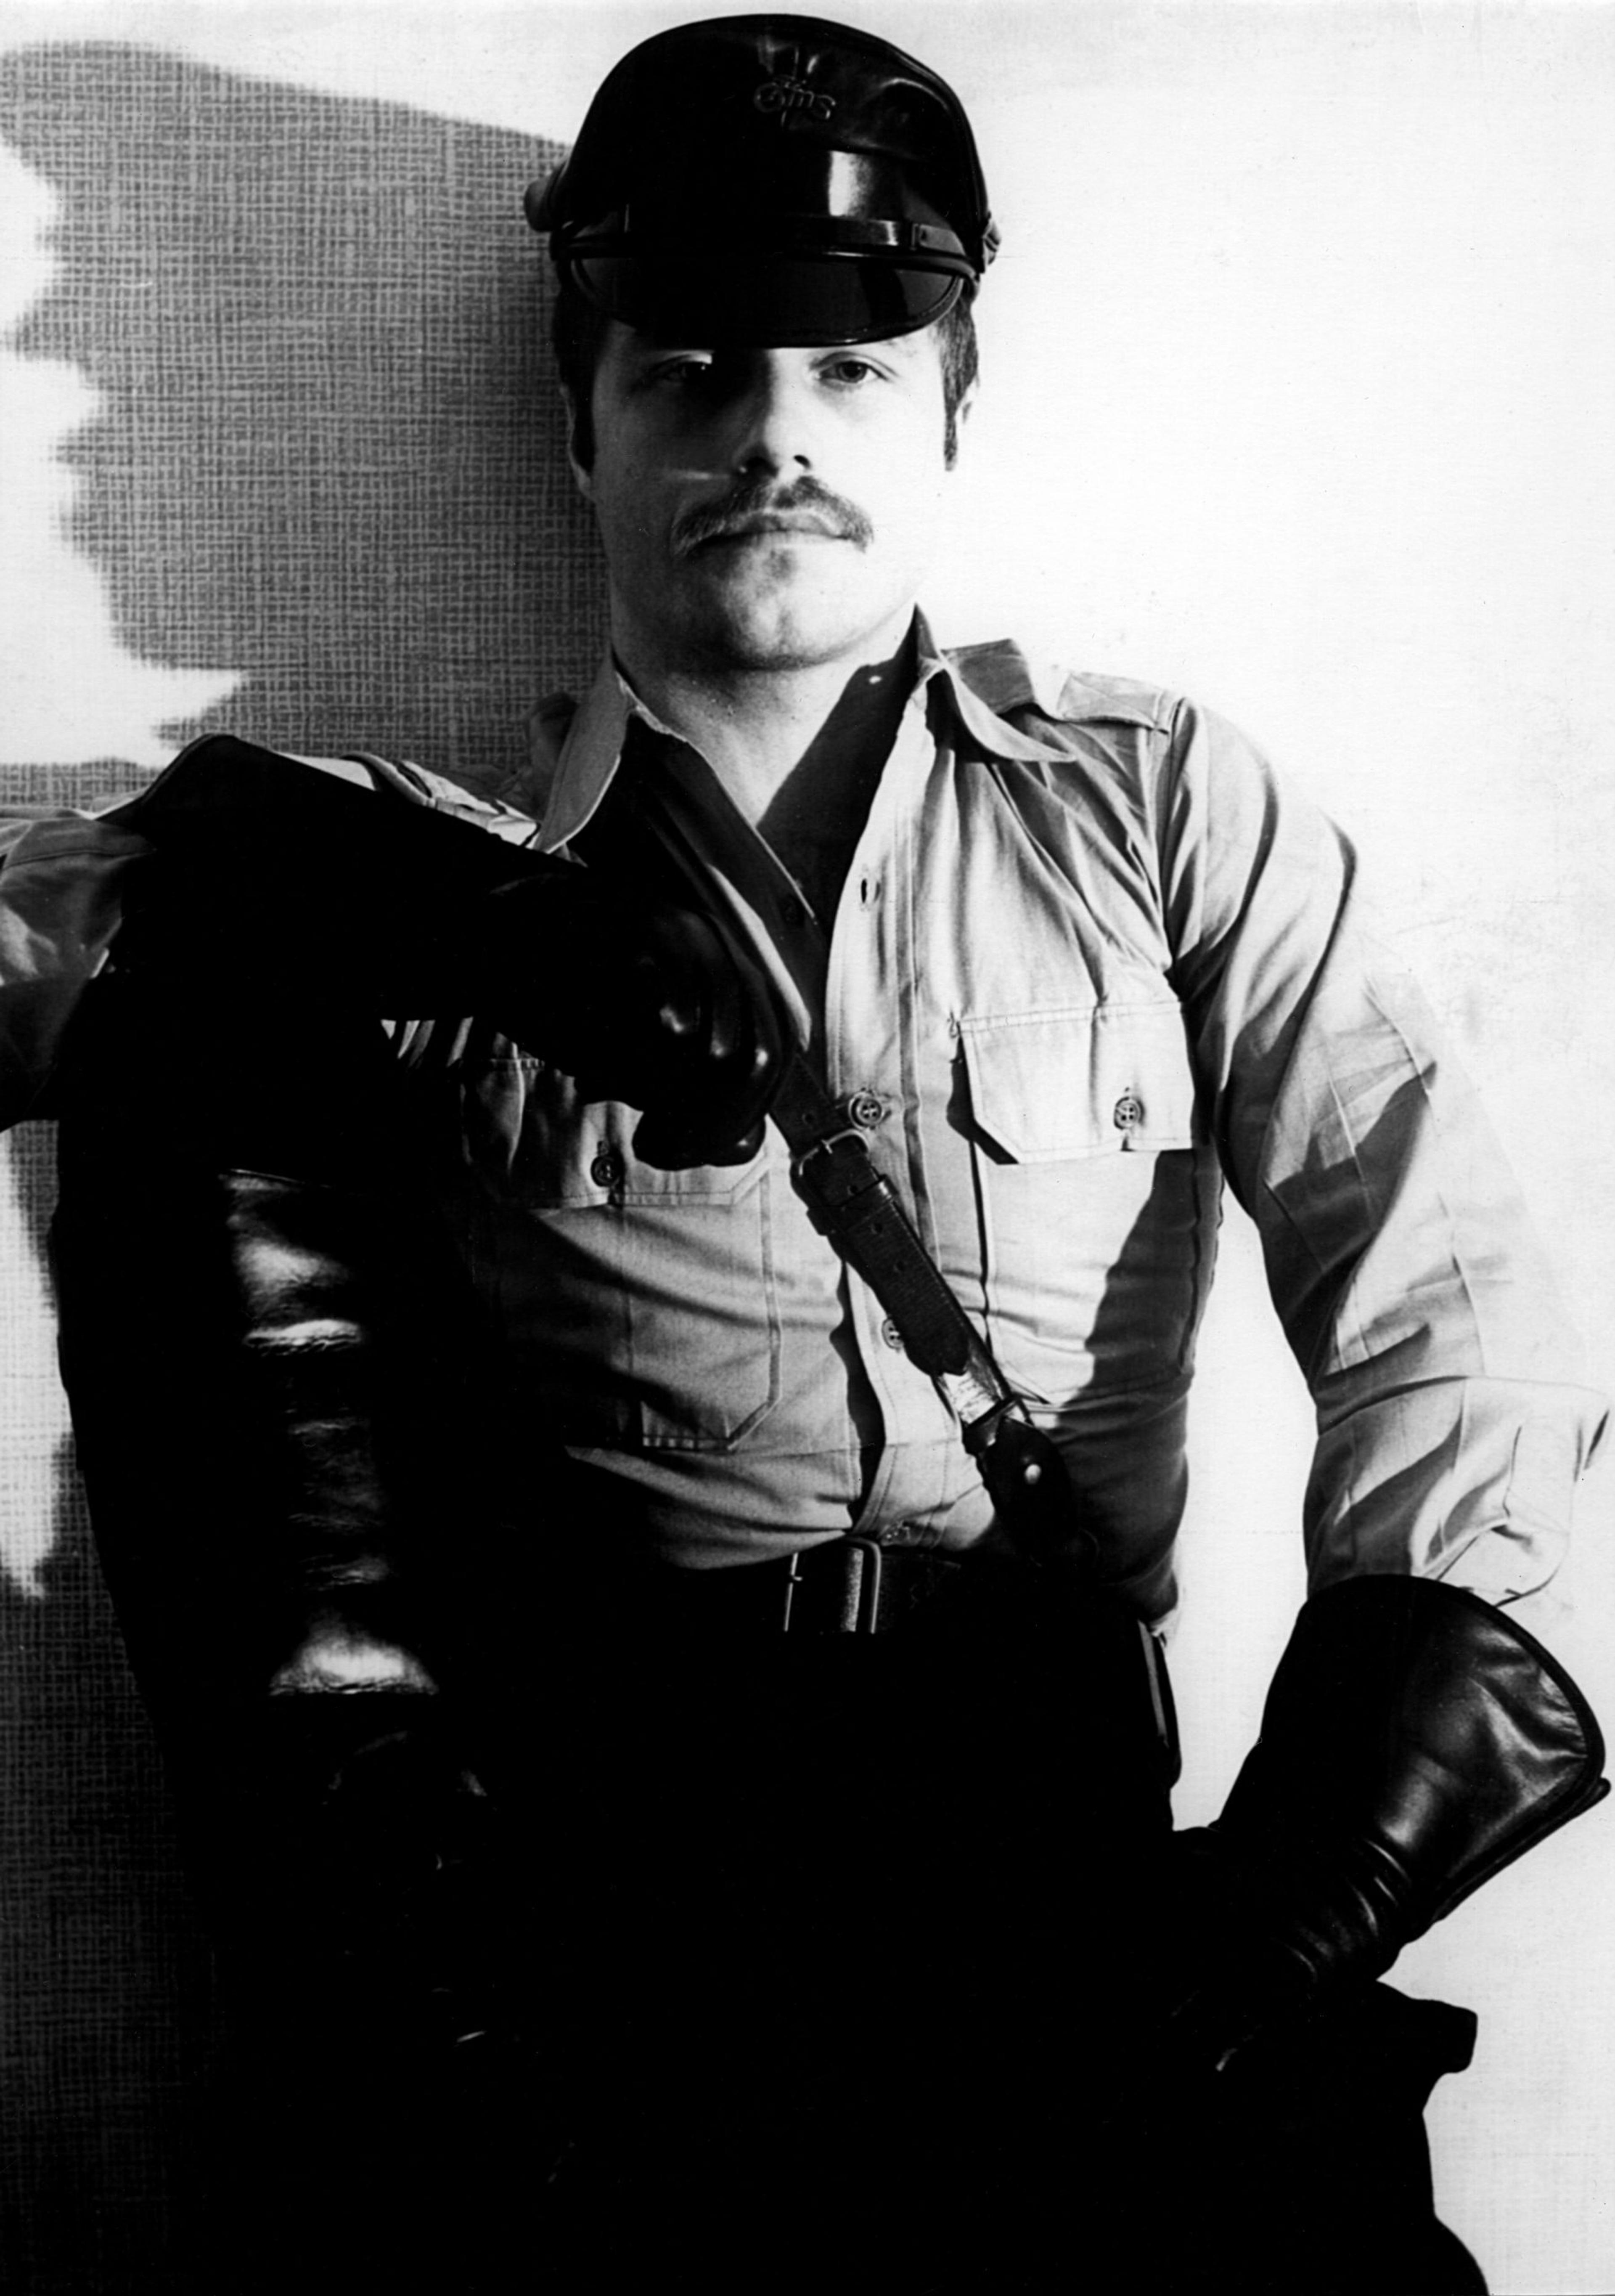 A black and white portrait of a man in uniform wearing black leather gloves